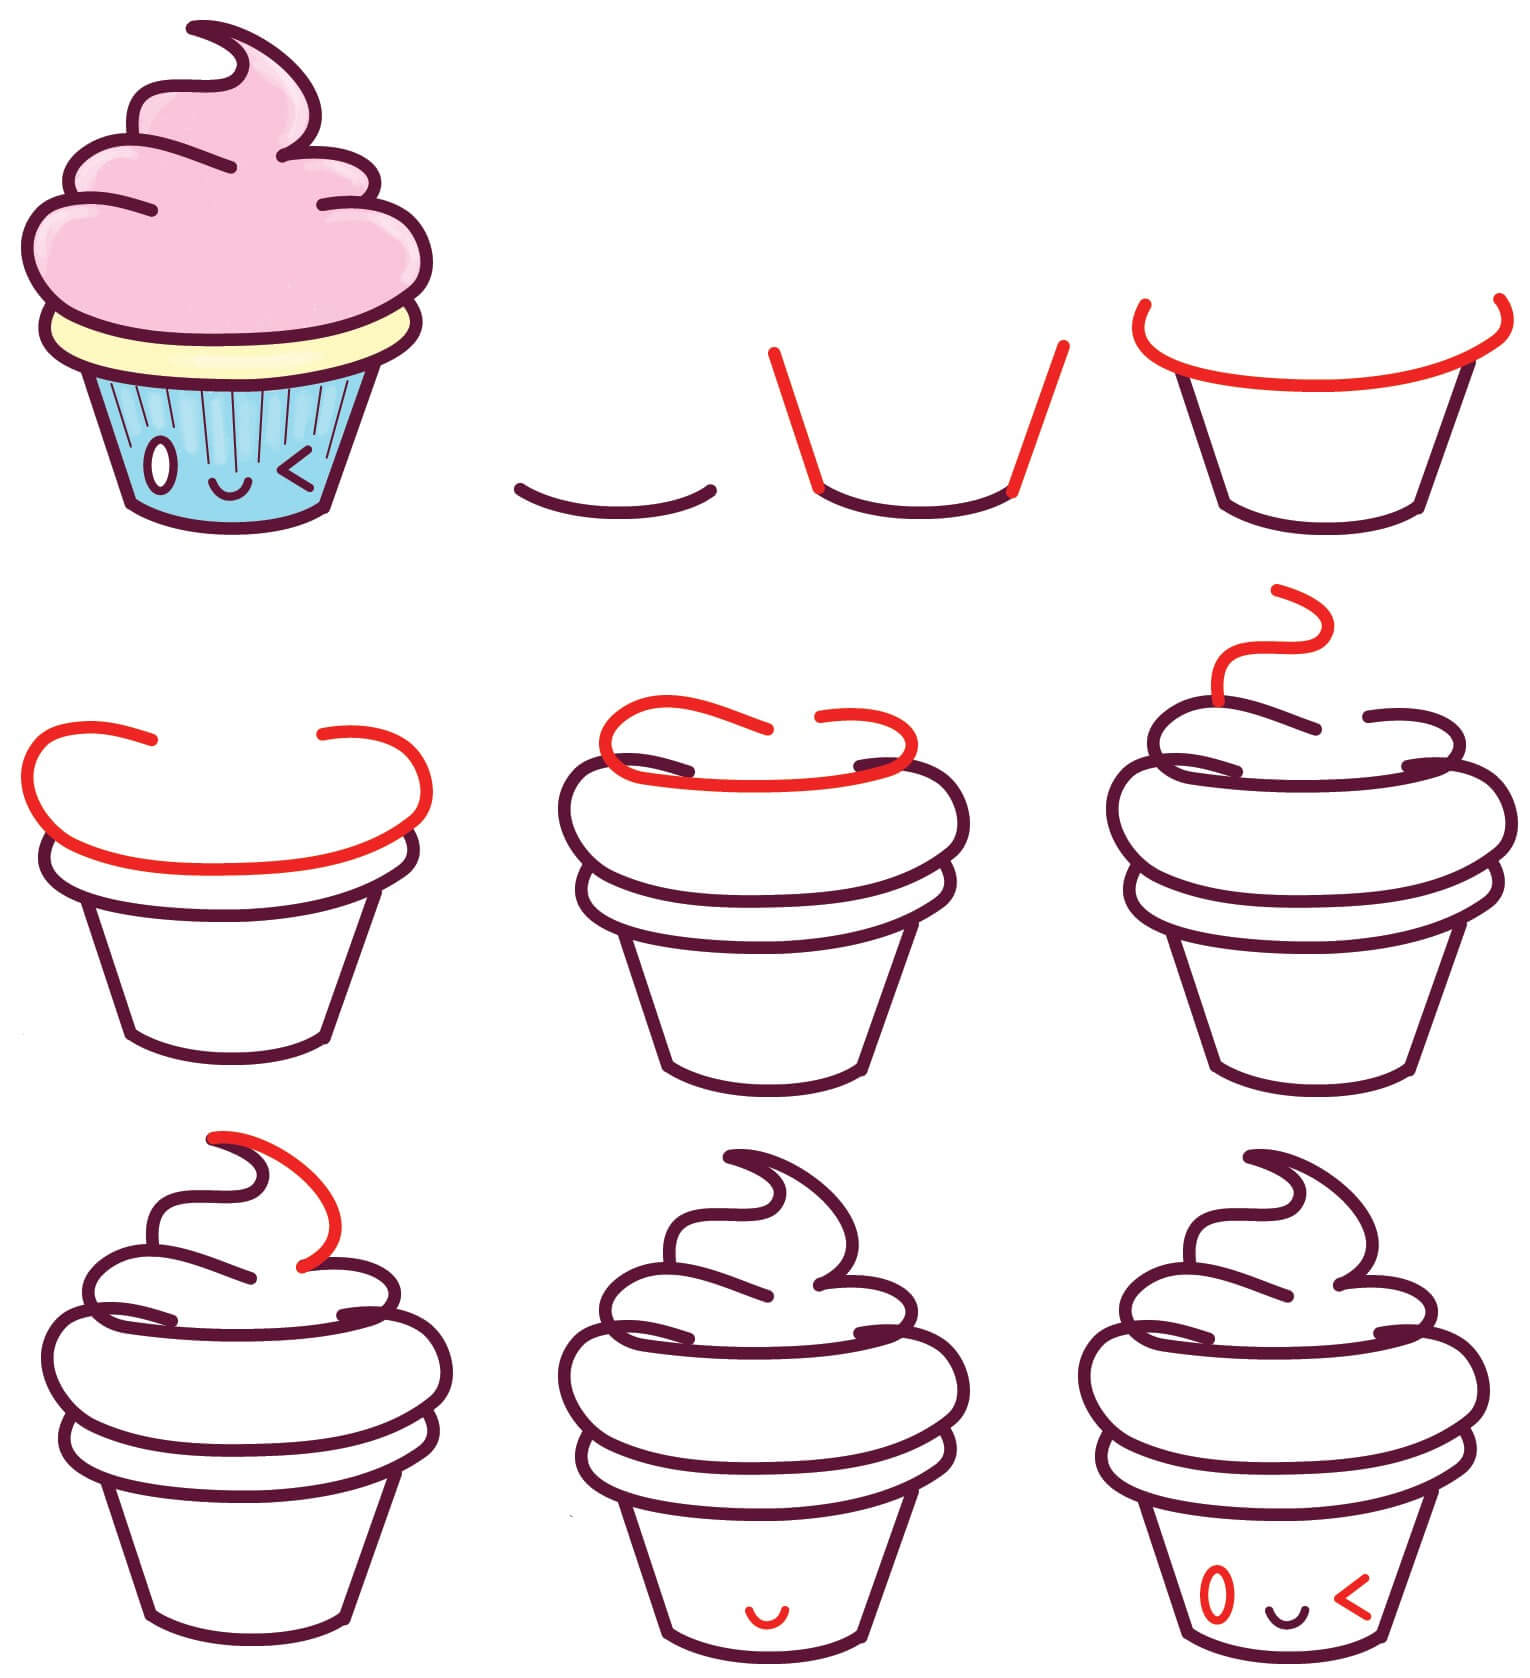 How to draw Cupcakes idea (5)